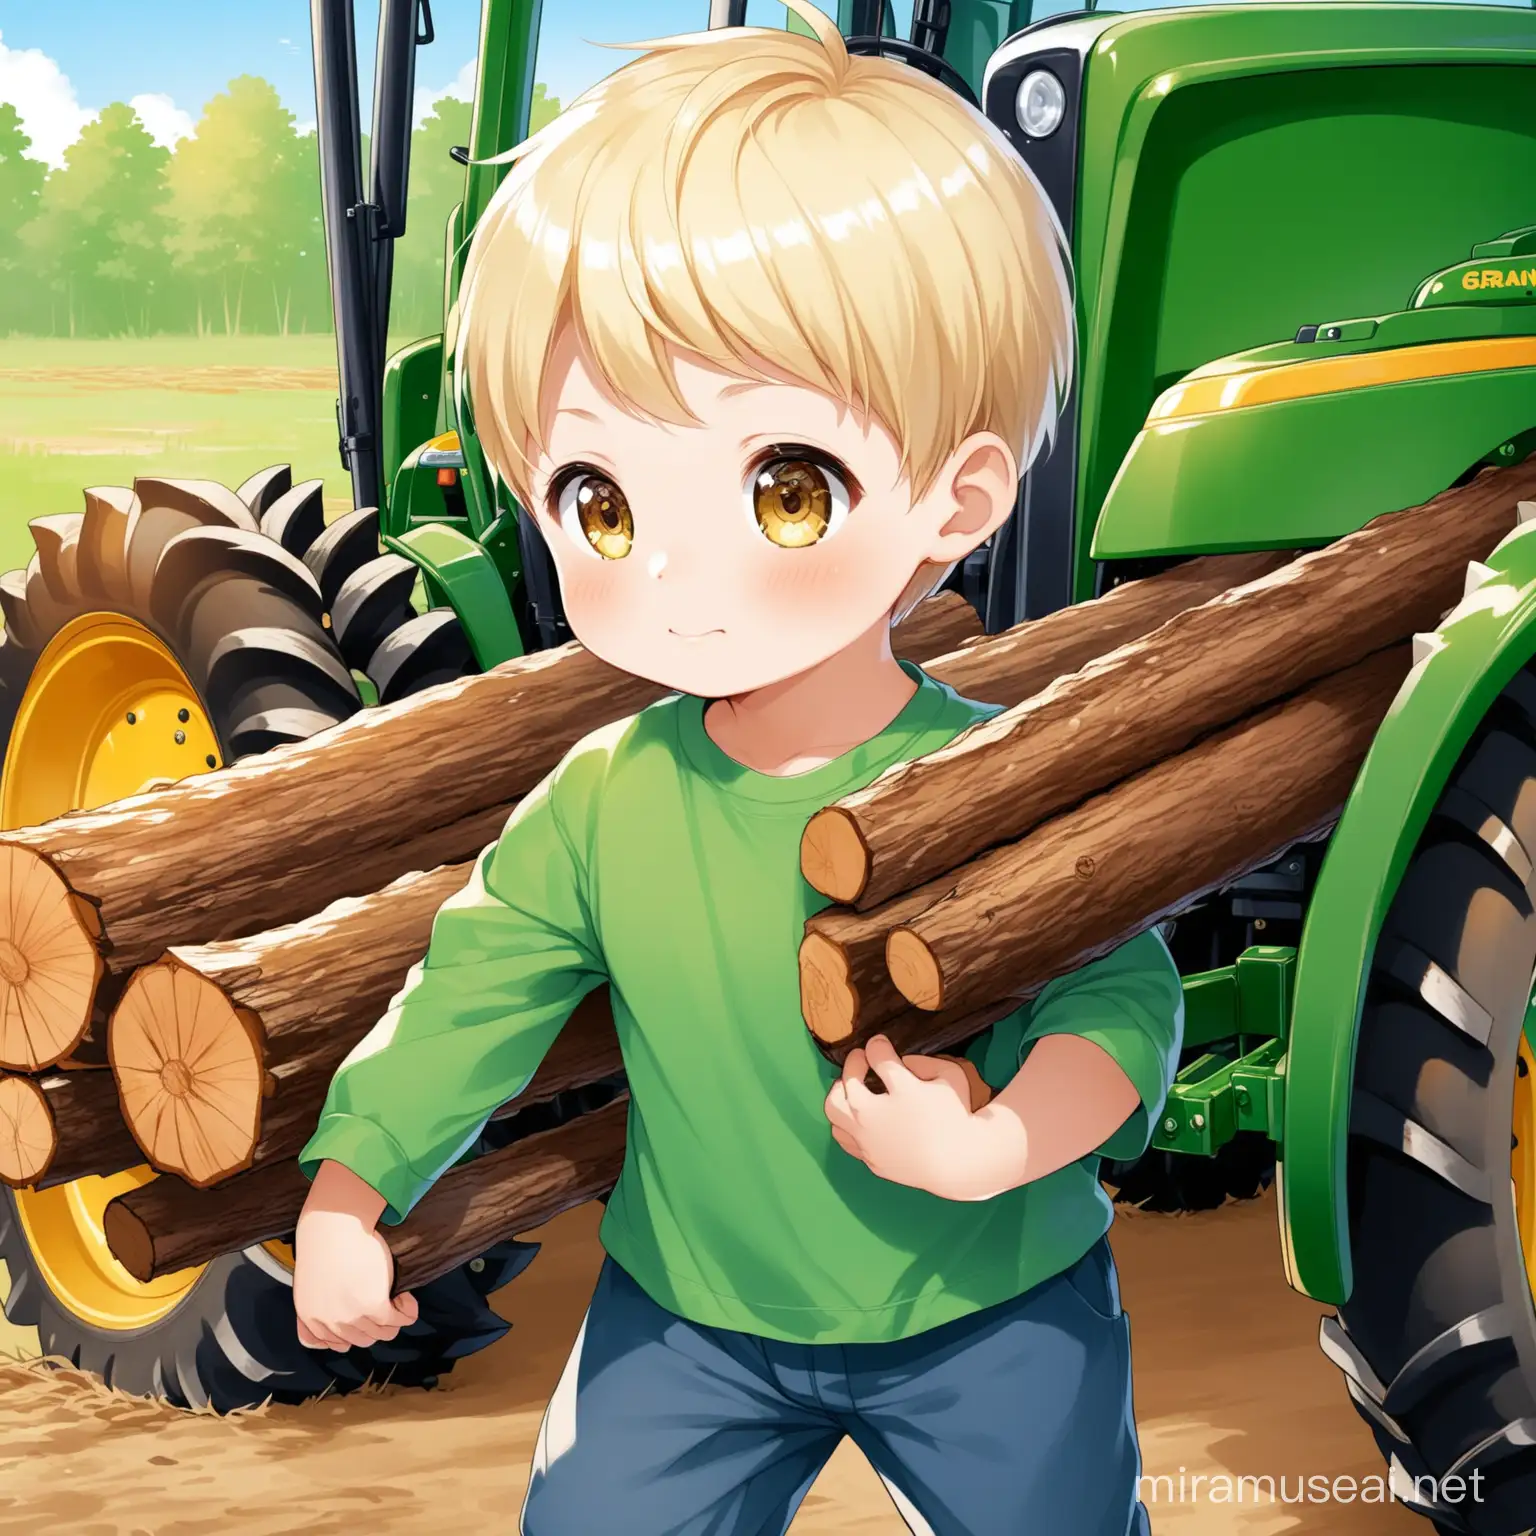  boy age 2 with short blonde hair and hazel eyes, carrying fire wood from green tractor loader. He is helping his grandpa who has gray hair